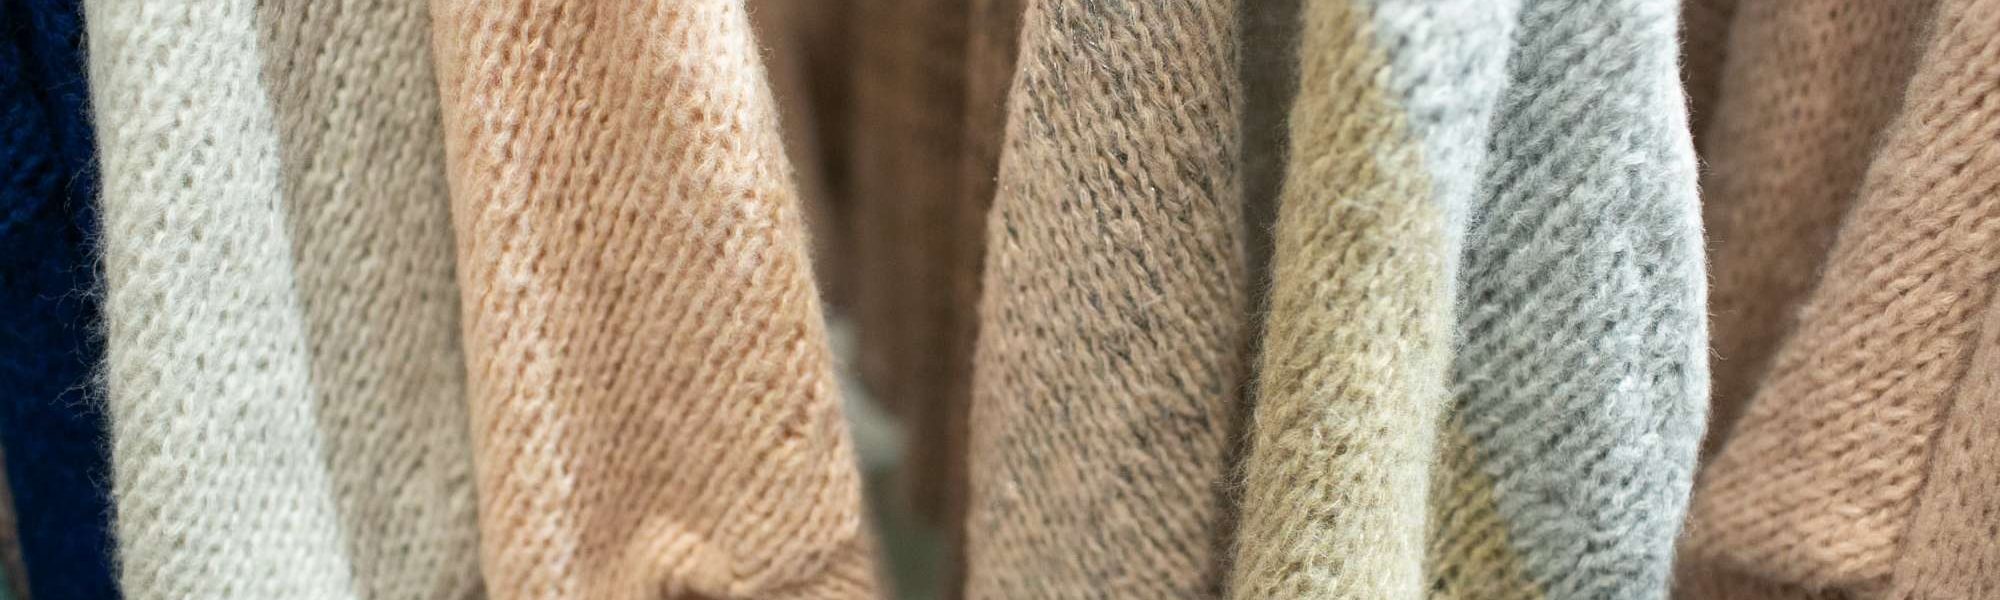 New England Apparel Show - close up of sweaters